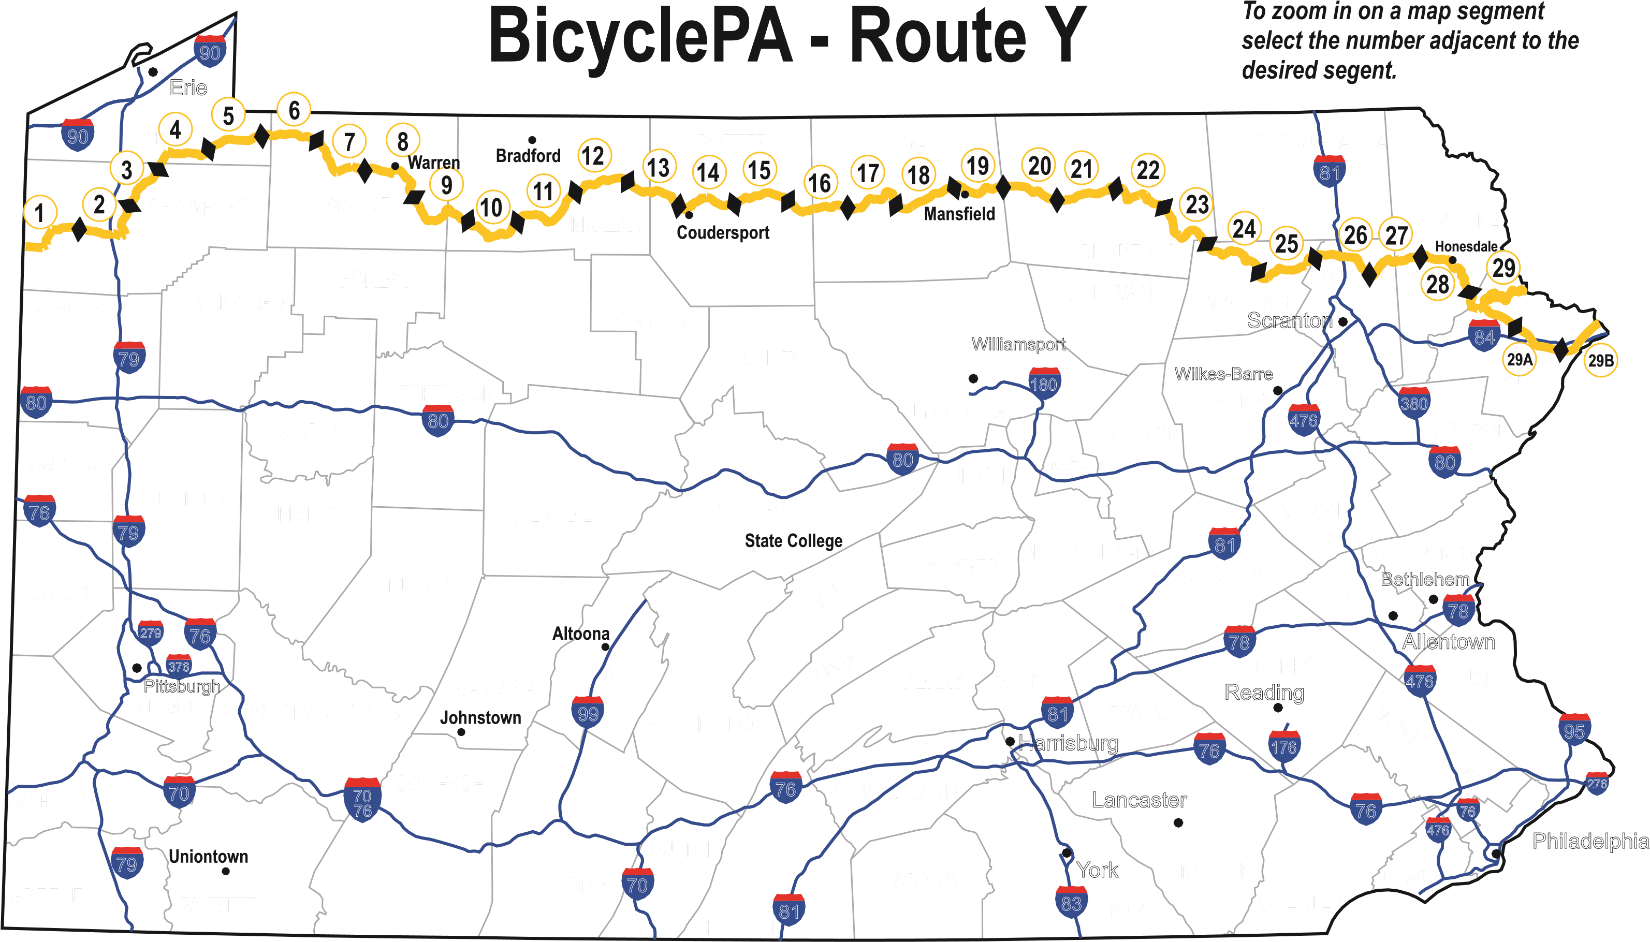 A map of the route DOC Religious Services Administrator Ulli Klemm took across PA on his bike